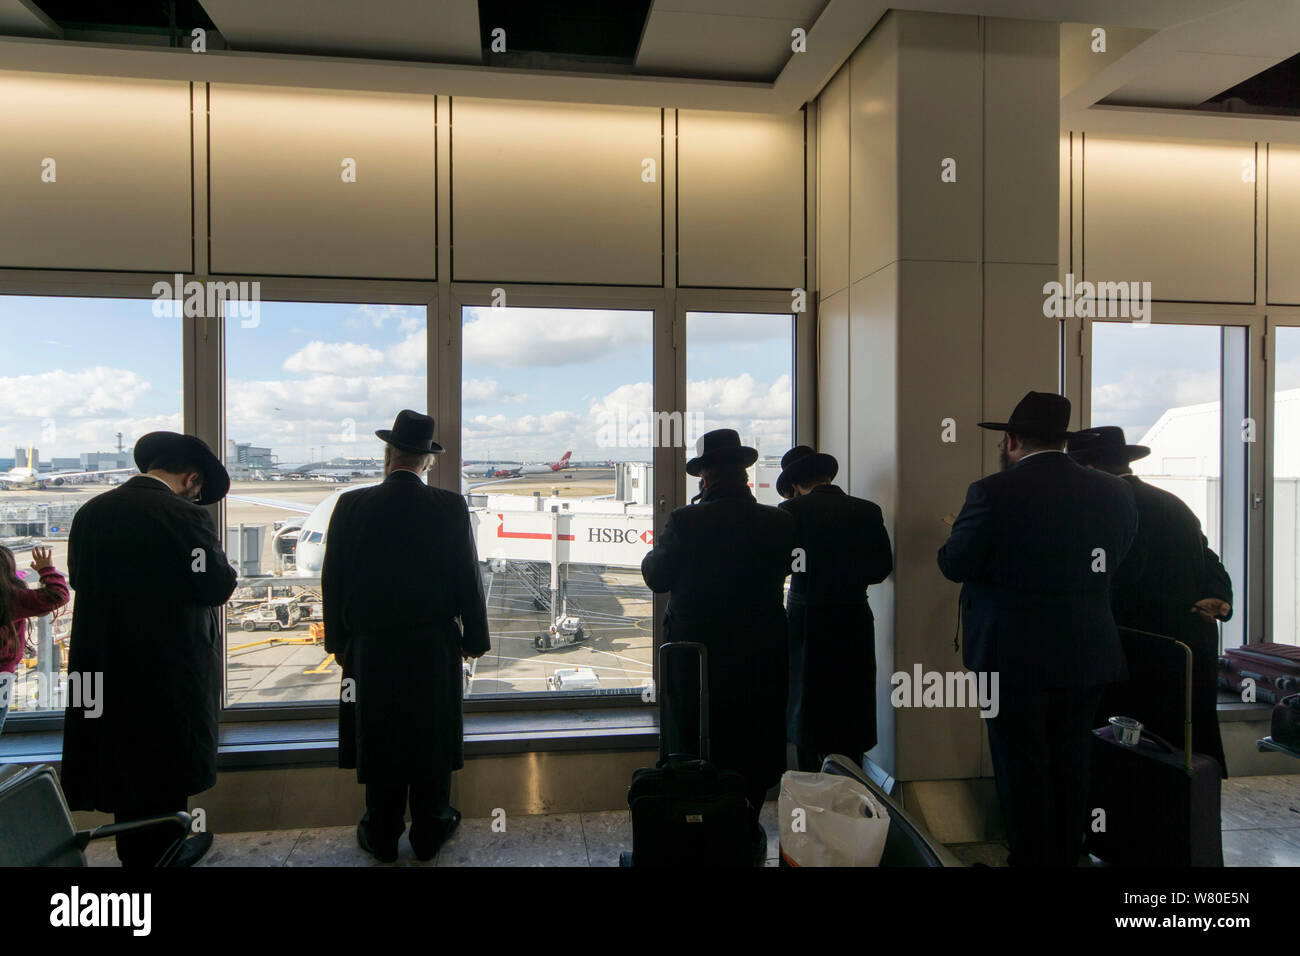 Heathrow Airport, London, United Kingdom. A group of Ultra-Orthodox ('Haredi') Jewish men pray while waiting for a flight. Stock Photo